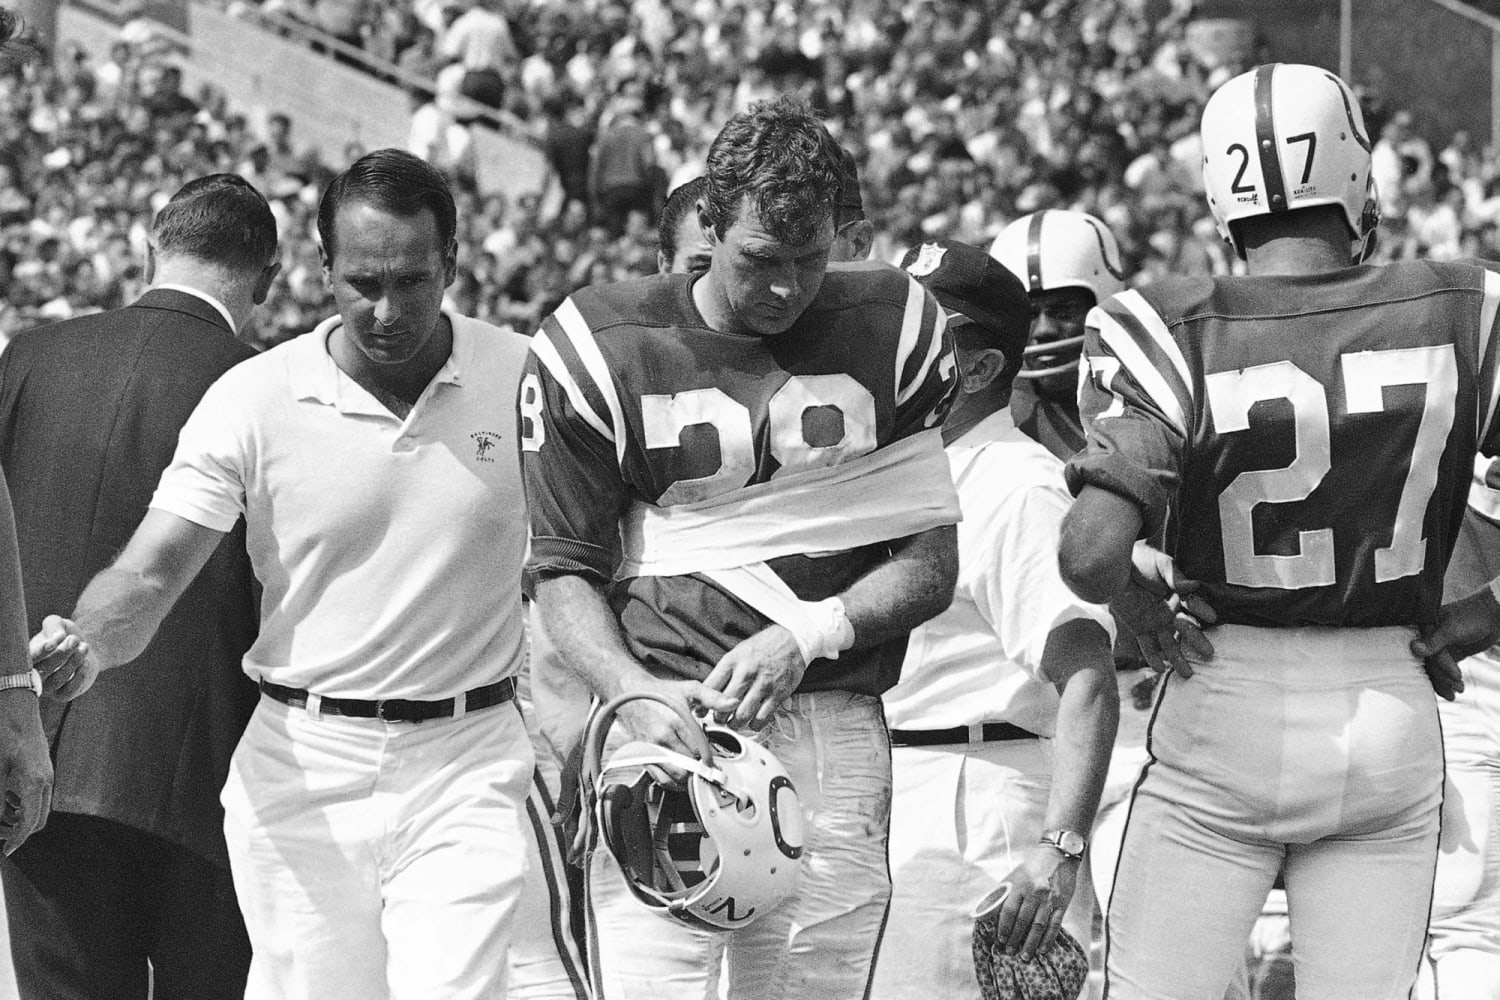 Jimmy Orr, former star WR for Colts and Steelers, dies at 85